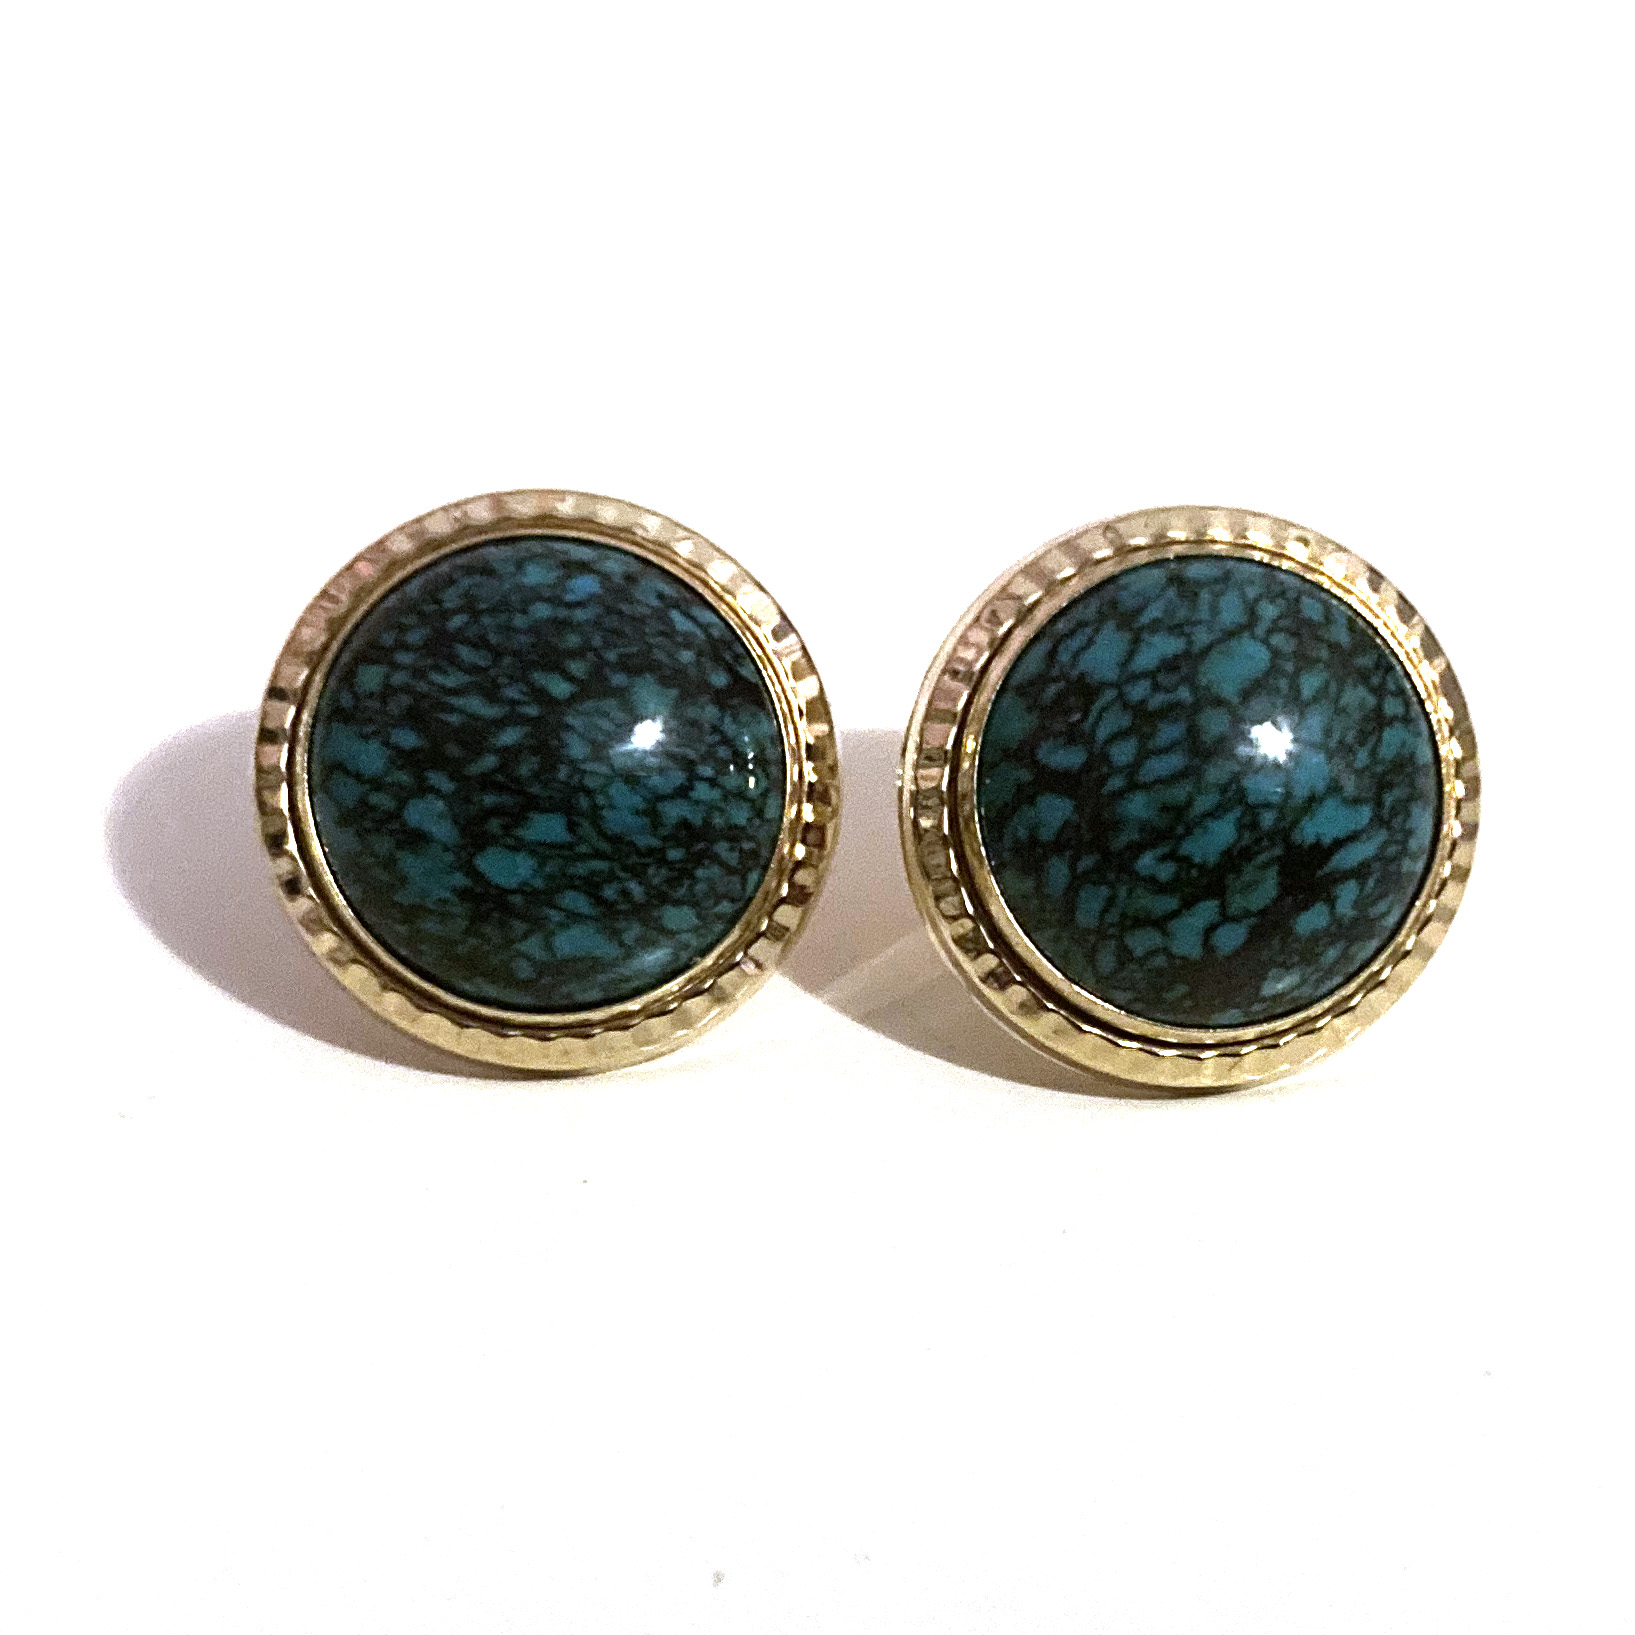 14k Yellow Gold 12mm Round Turquoise Stud Earrings with Diamond-cut Border